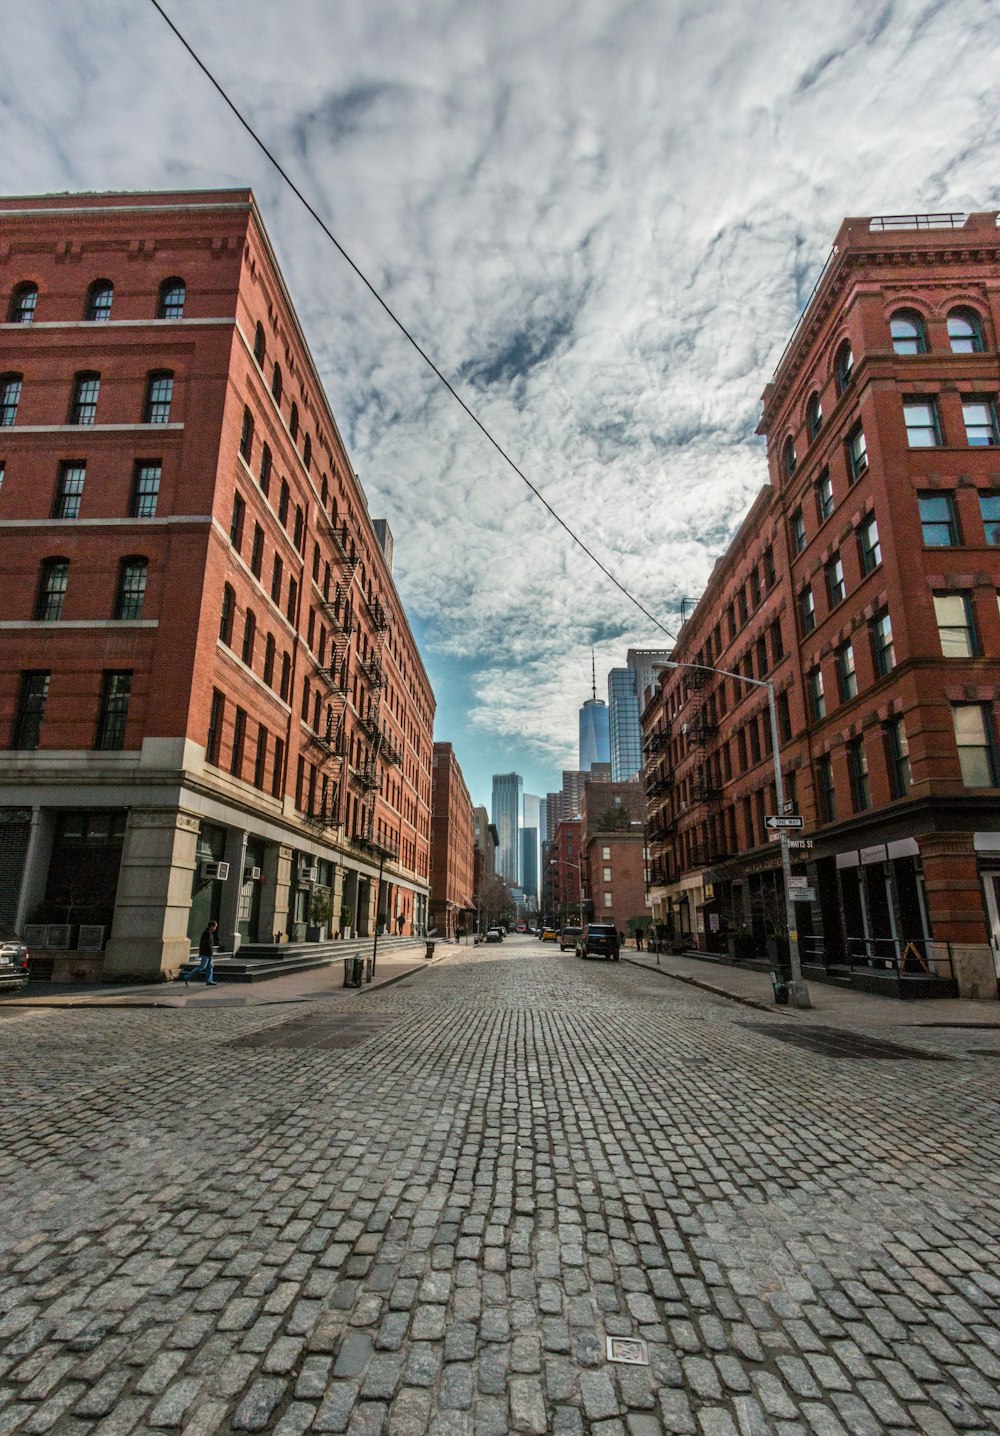 27+ City Street Pictures | Download Free Images on Unsplash